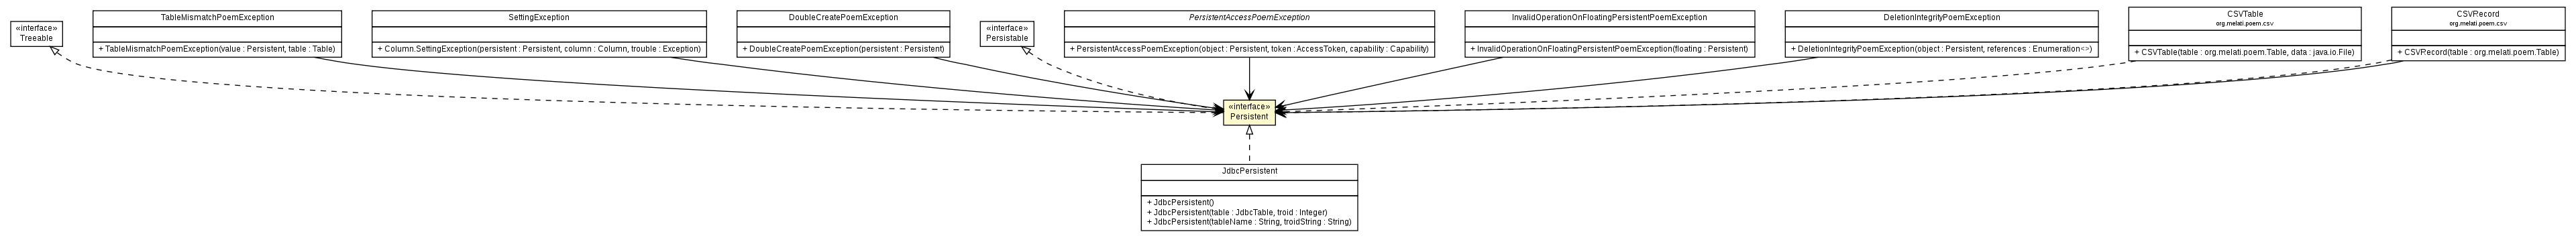 Package class diagram package Persistent